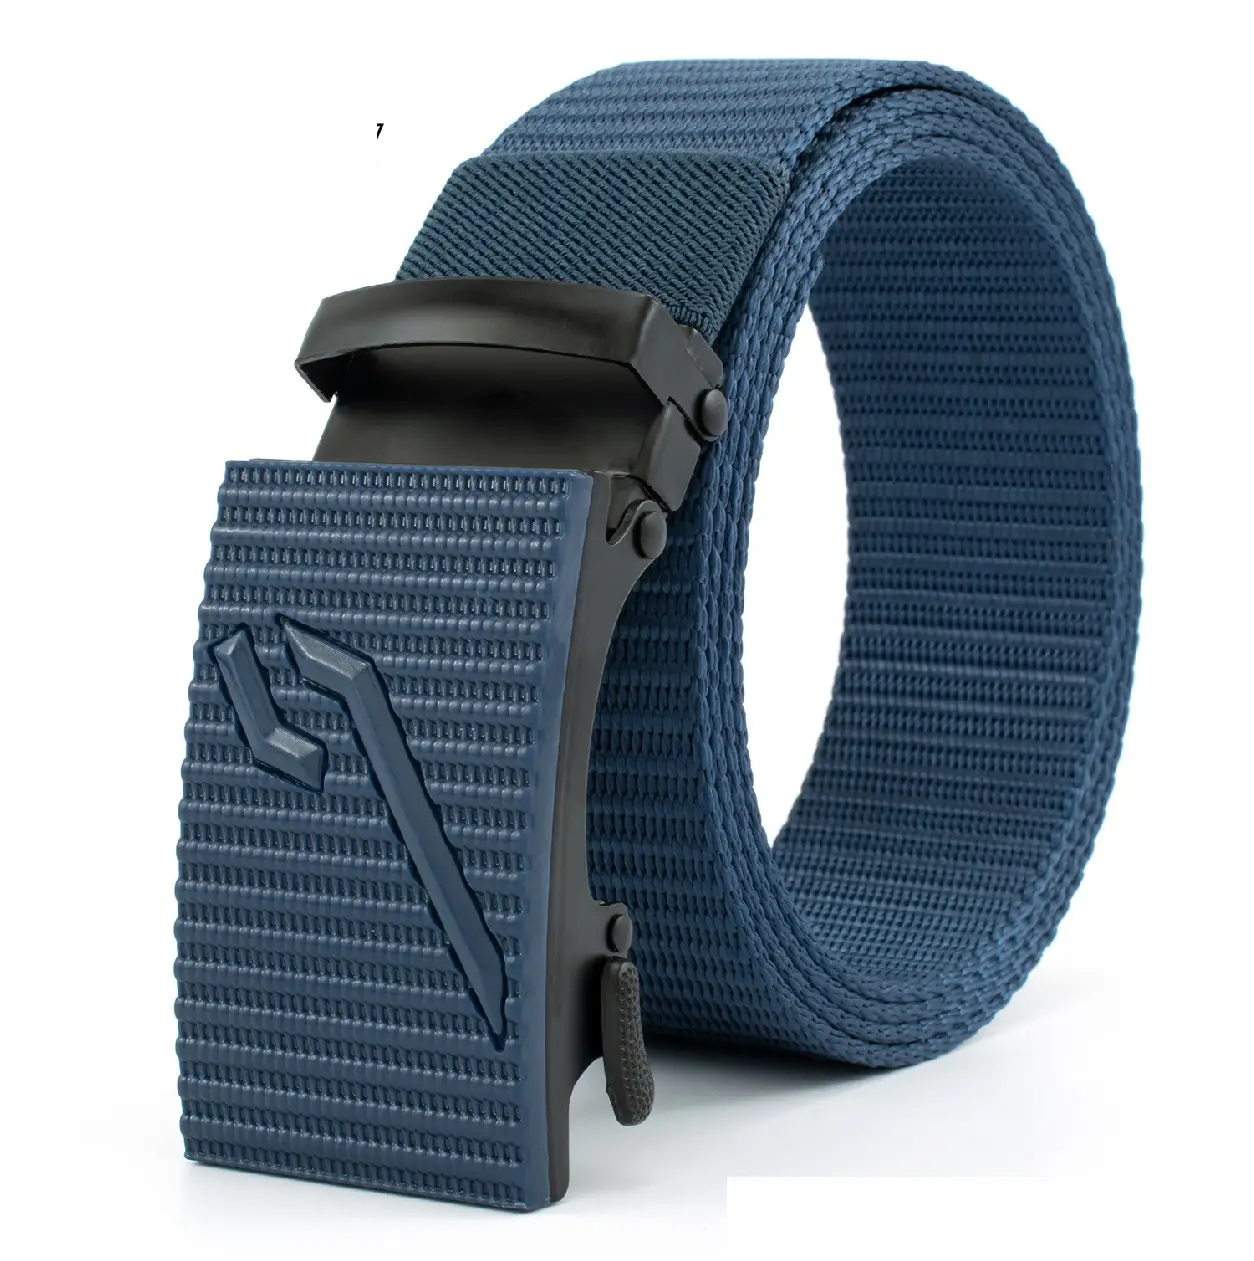 Fashion Customized New Design Outdoor Tactical Nylon Duty Cheap Web Canvas Automatic Buckle Fabric Belt